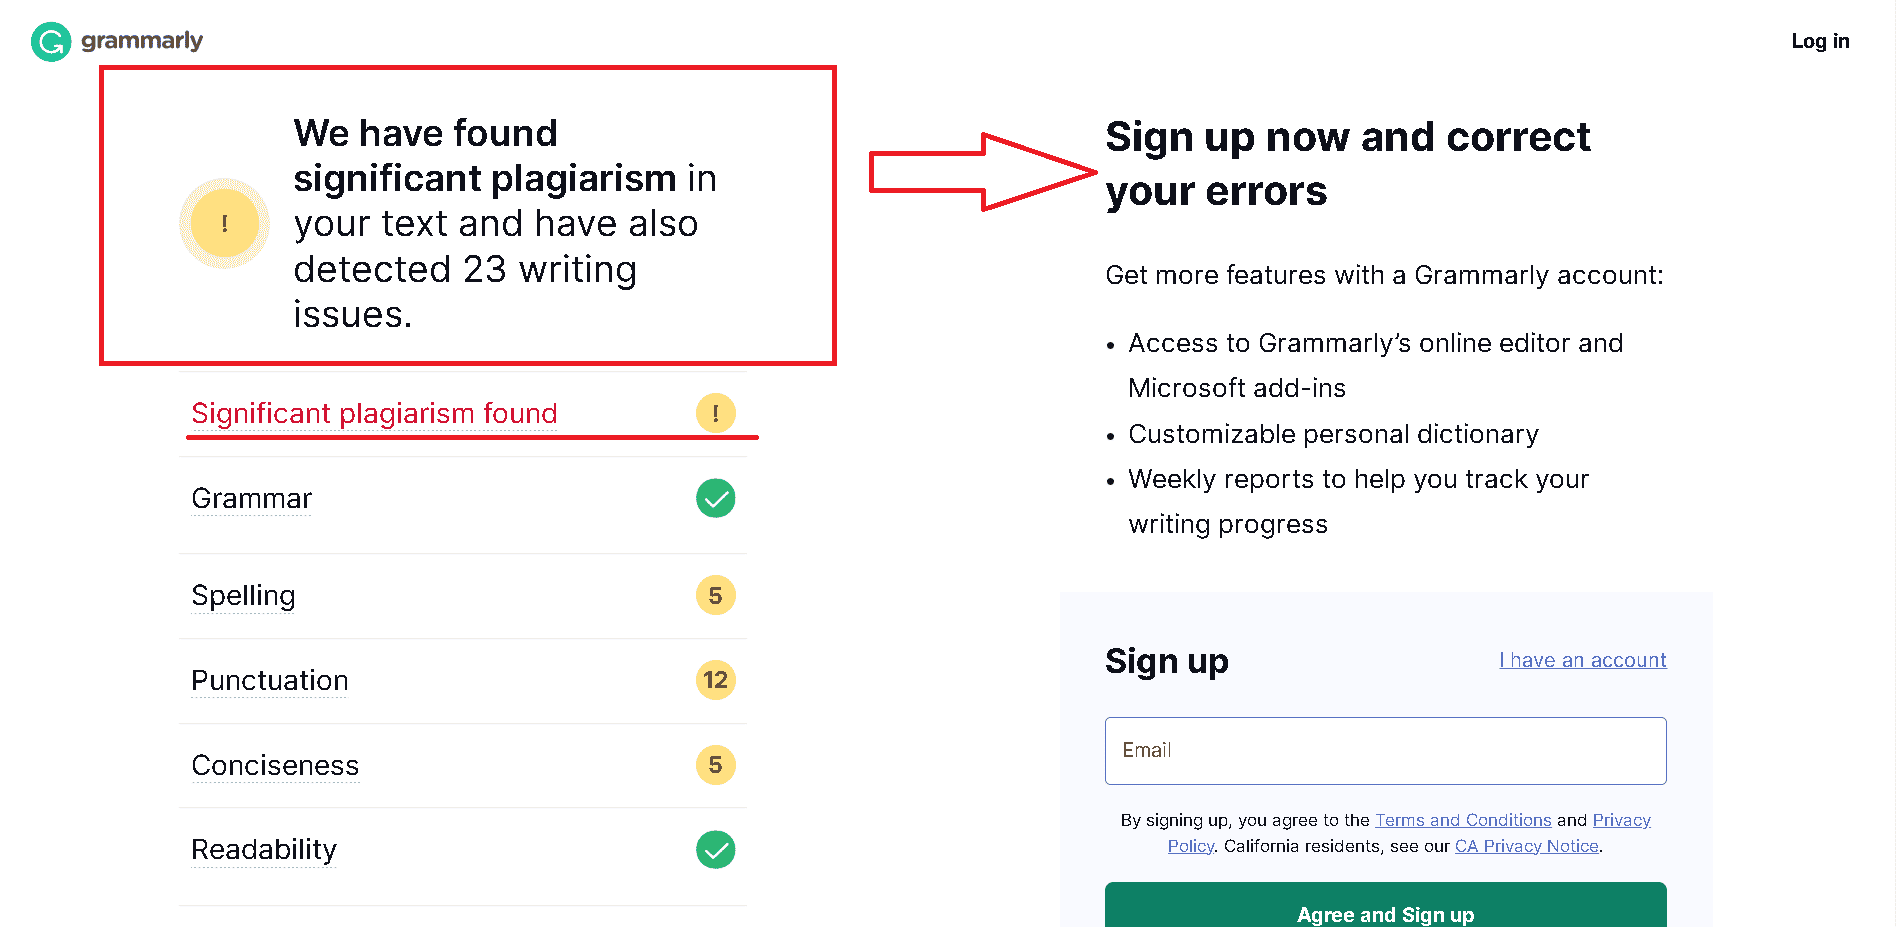 You need to sign up to Grammarly Premium to use their plagiarism checker